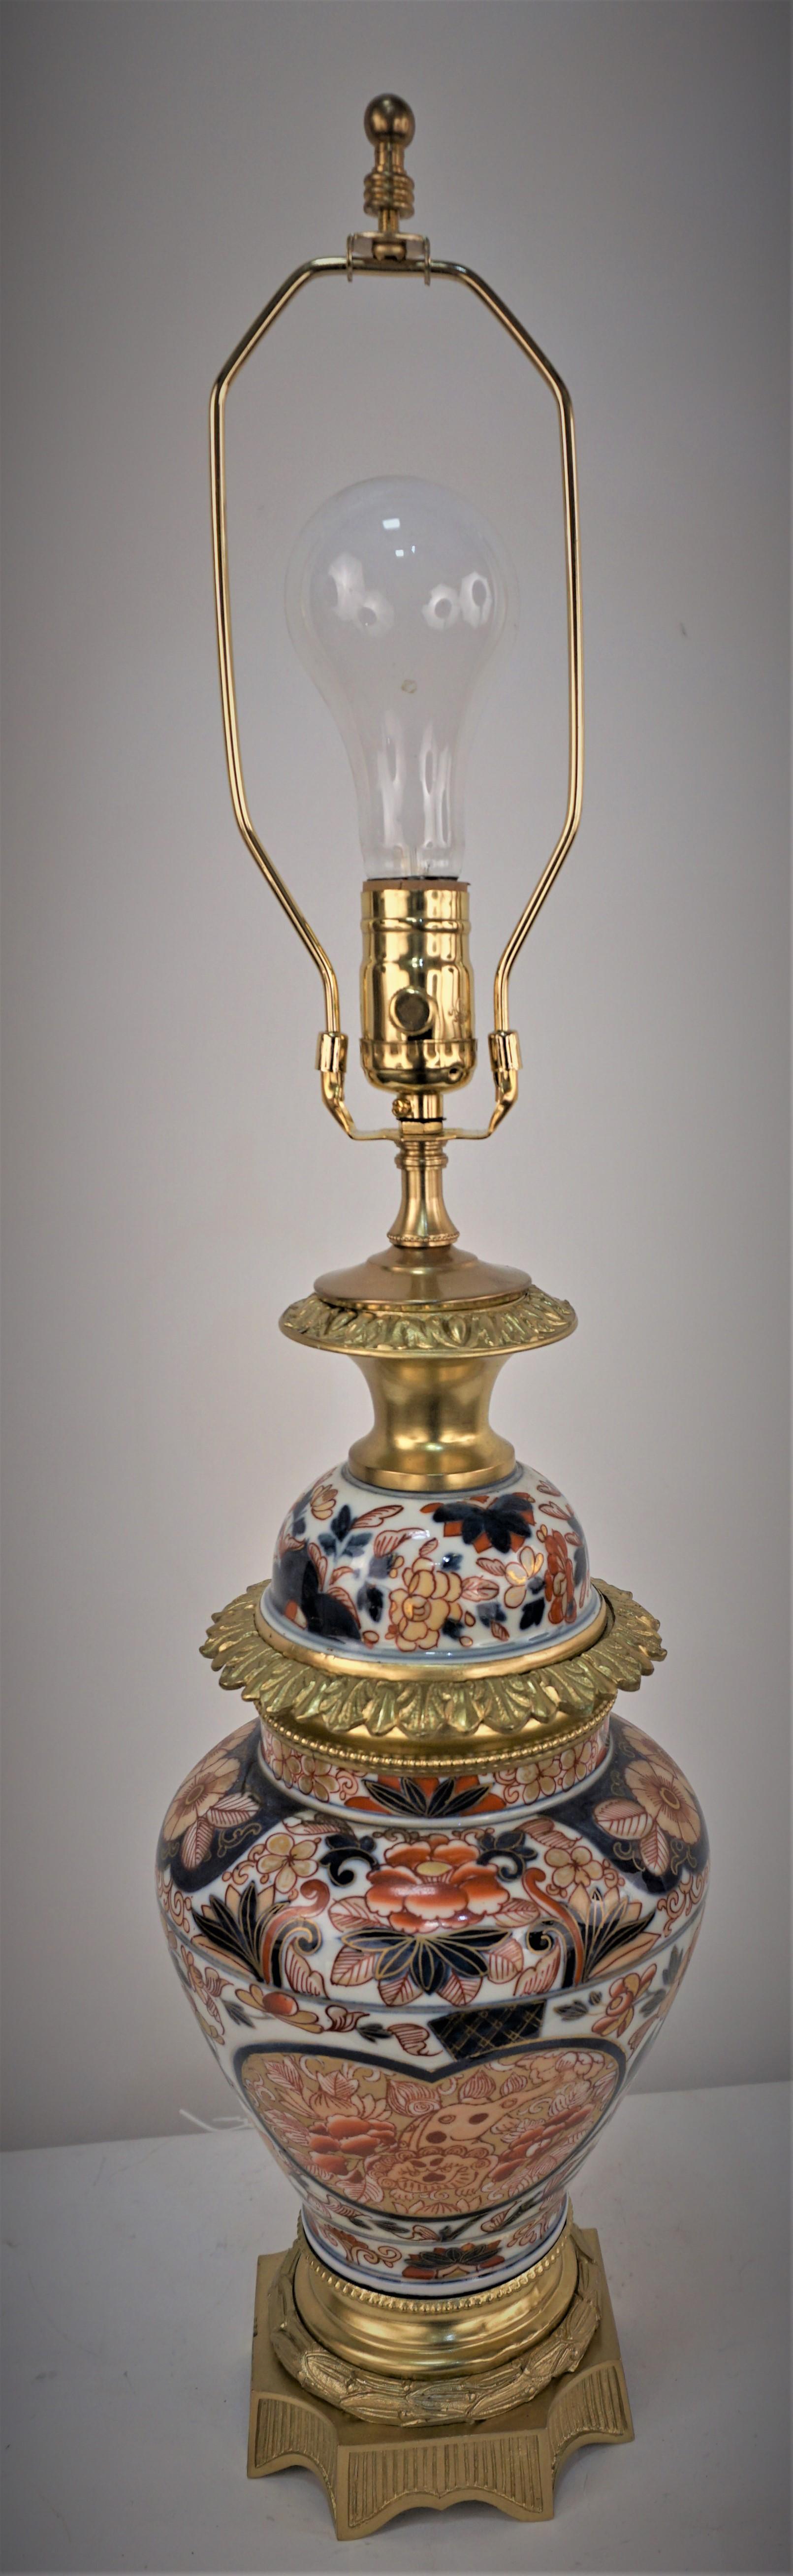 Imported 19th Japanese Imari porcelain lamp base to France and added bronze mounting to a beautiful oil lamp. and now professionally electrified and fitted with silk lampshade.